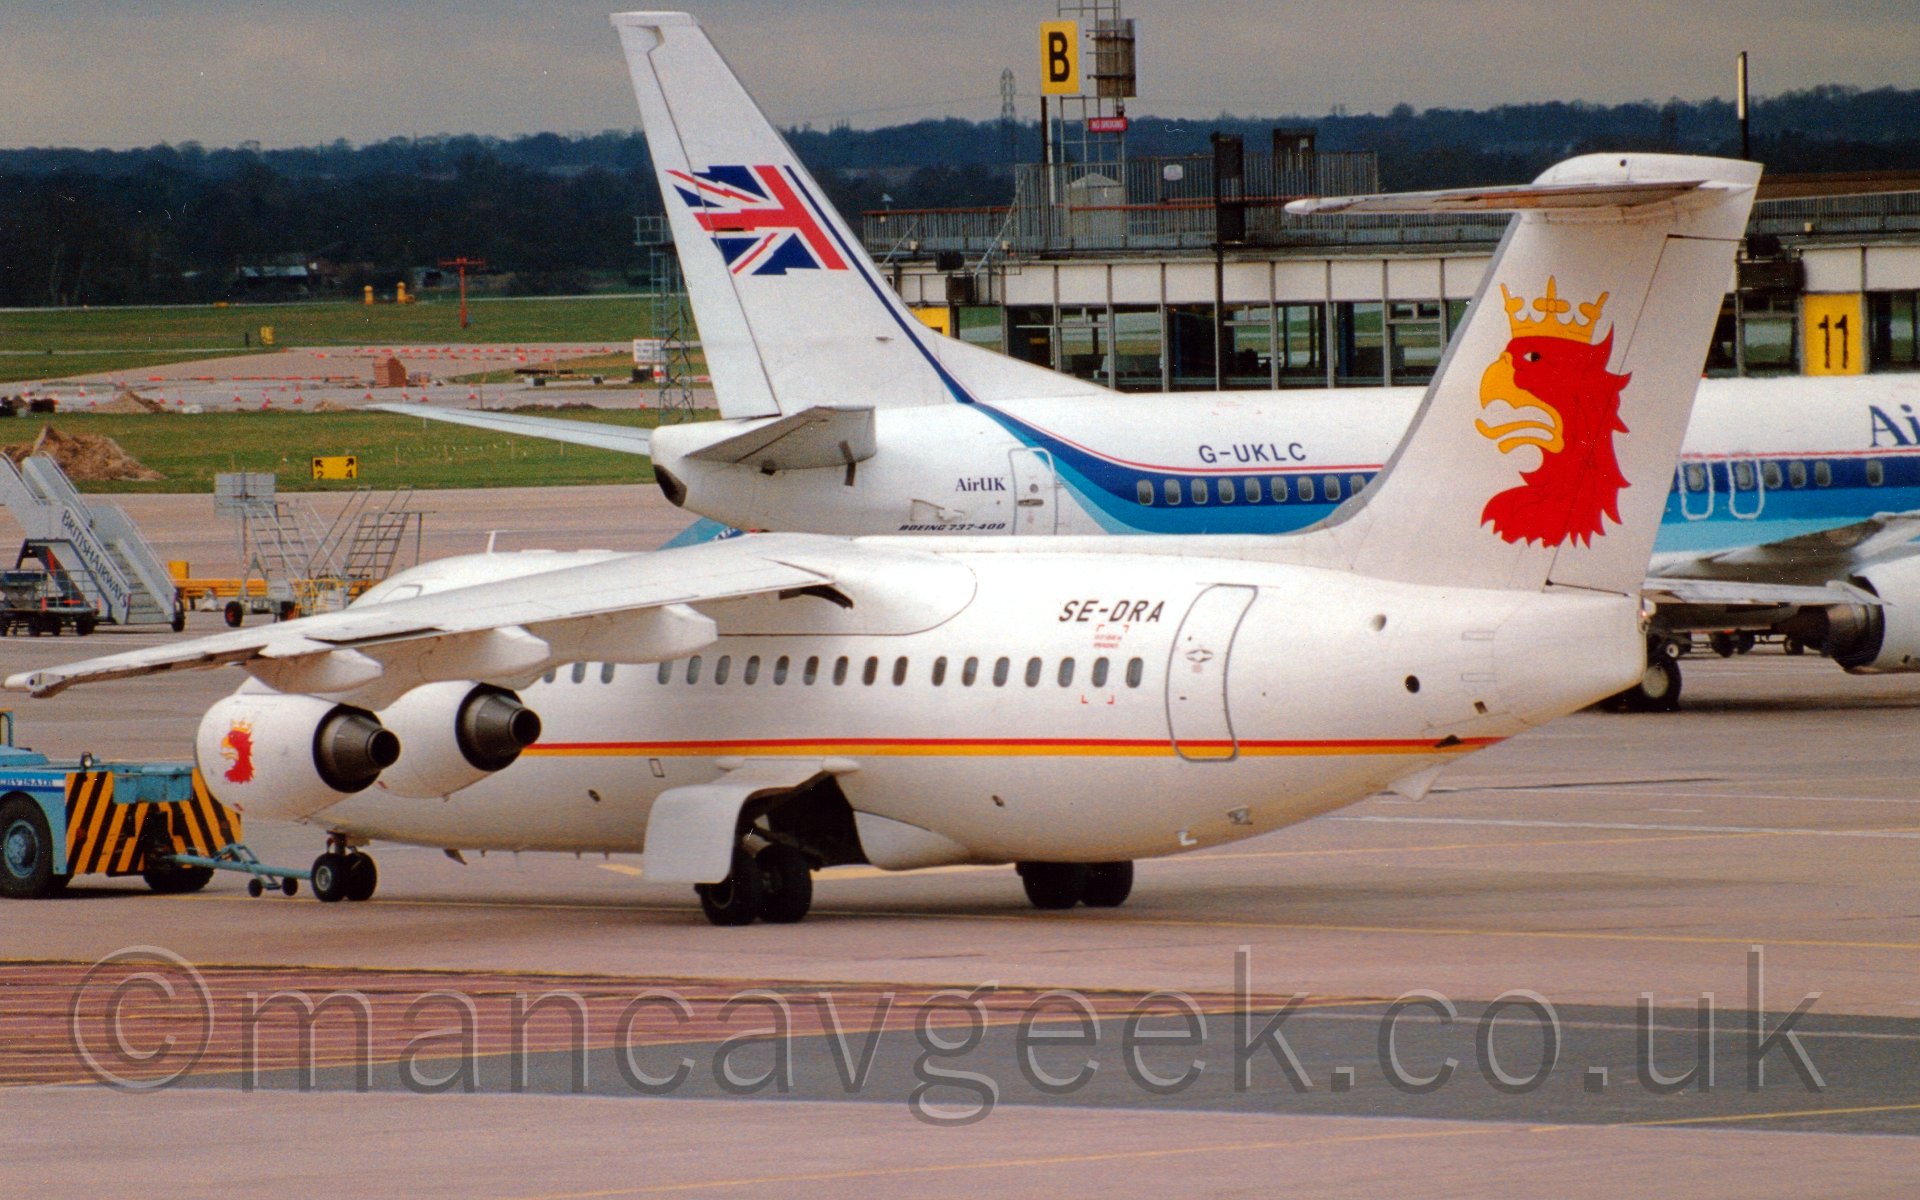 Side view of a high-winged 4 engined jet airliner being puhed off it's stand, facing to the left of frame. The plane is white, with a thin red and yellow stripe running along the fuselage, and an anthopomorphised painting of the head of a red bird with a golden beak, wearing a gold crown. The birds beak is open, with it's tonguewaving. The planes registration "SE-DRA" is prominently displayed on the upper rear fuselage, just forward of the aft door. There is a low-slung light blue vehicle with diagonal yellow and black stripes on its rear attached by a blue bar to the nose of the plane, slightly out of frame on the left. Behind is a slightly larger white twin engined jet airliner with a three-tone blue stripe running along the fuselage, swooping up in to the tail where it becomes a flagpole for a waving half British flag,behind which is a terminal building. In the background, large grassed areas give way to trees in the distance, under a grey sky.